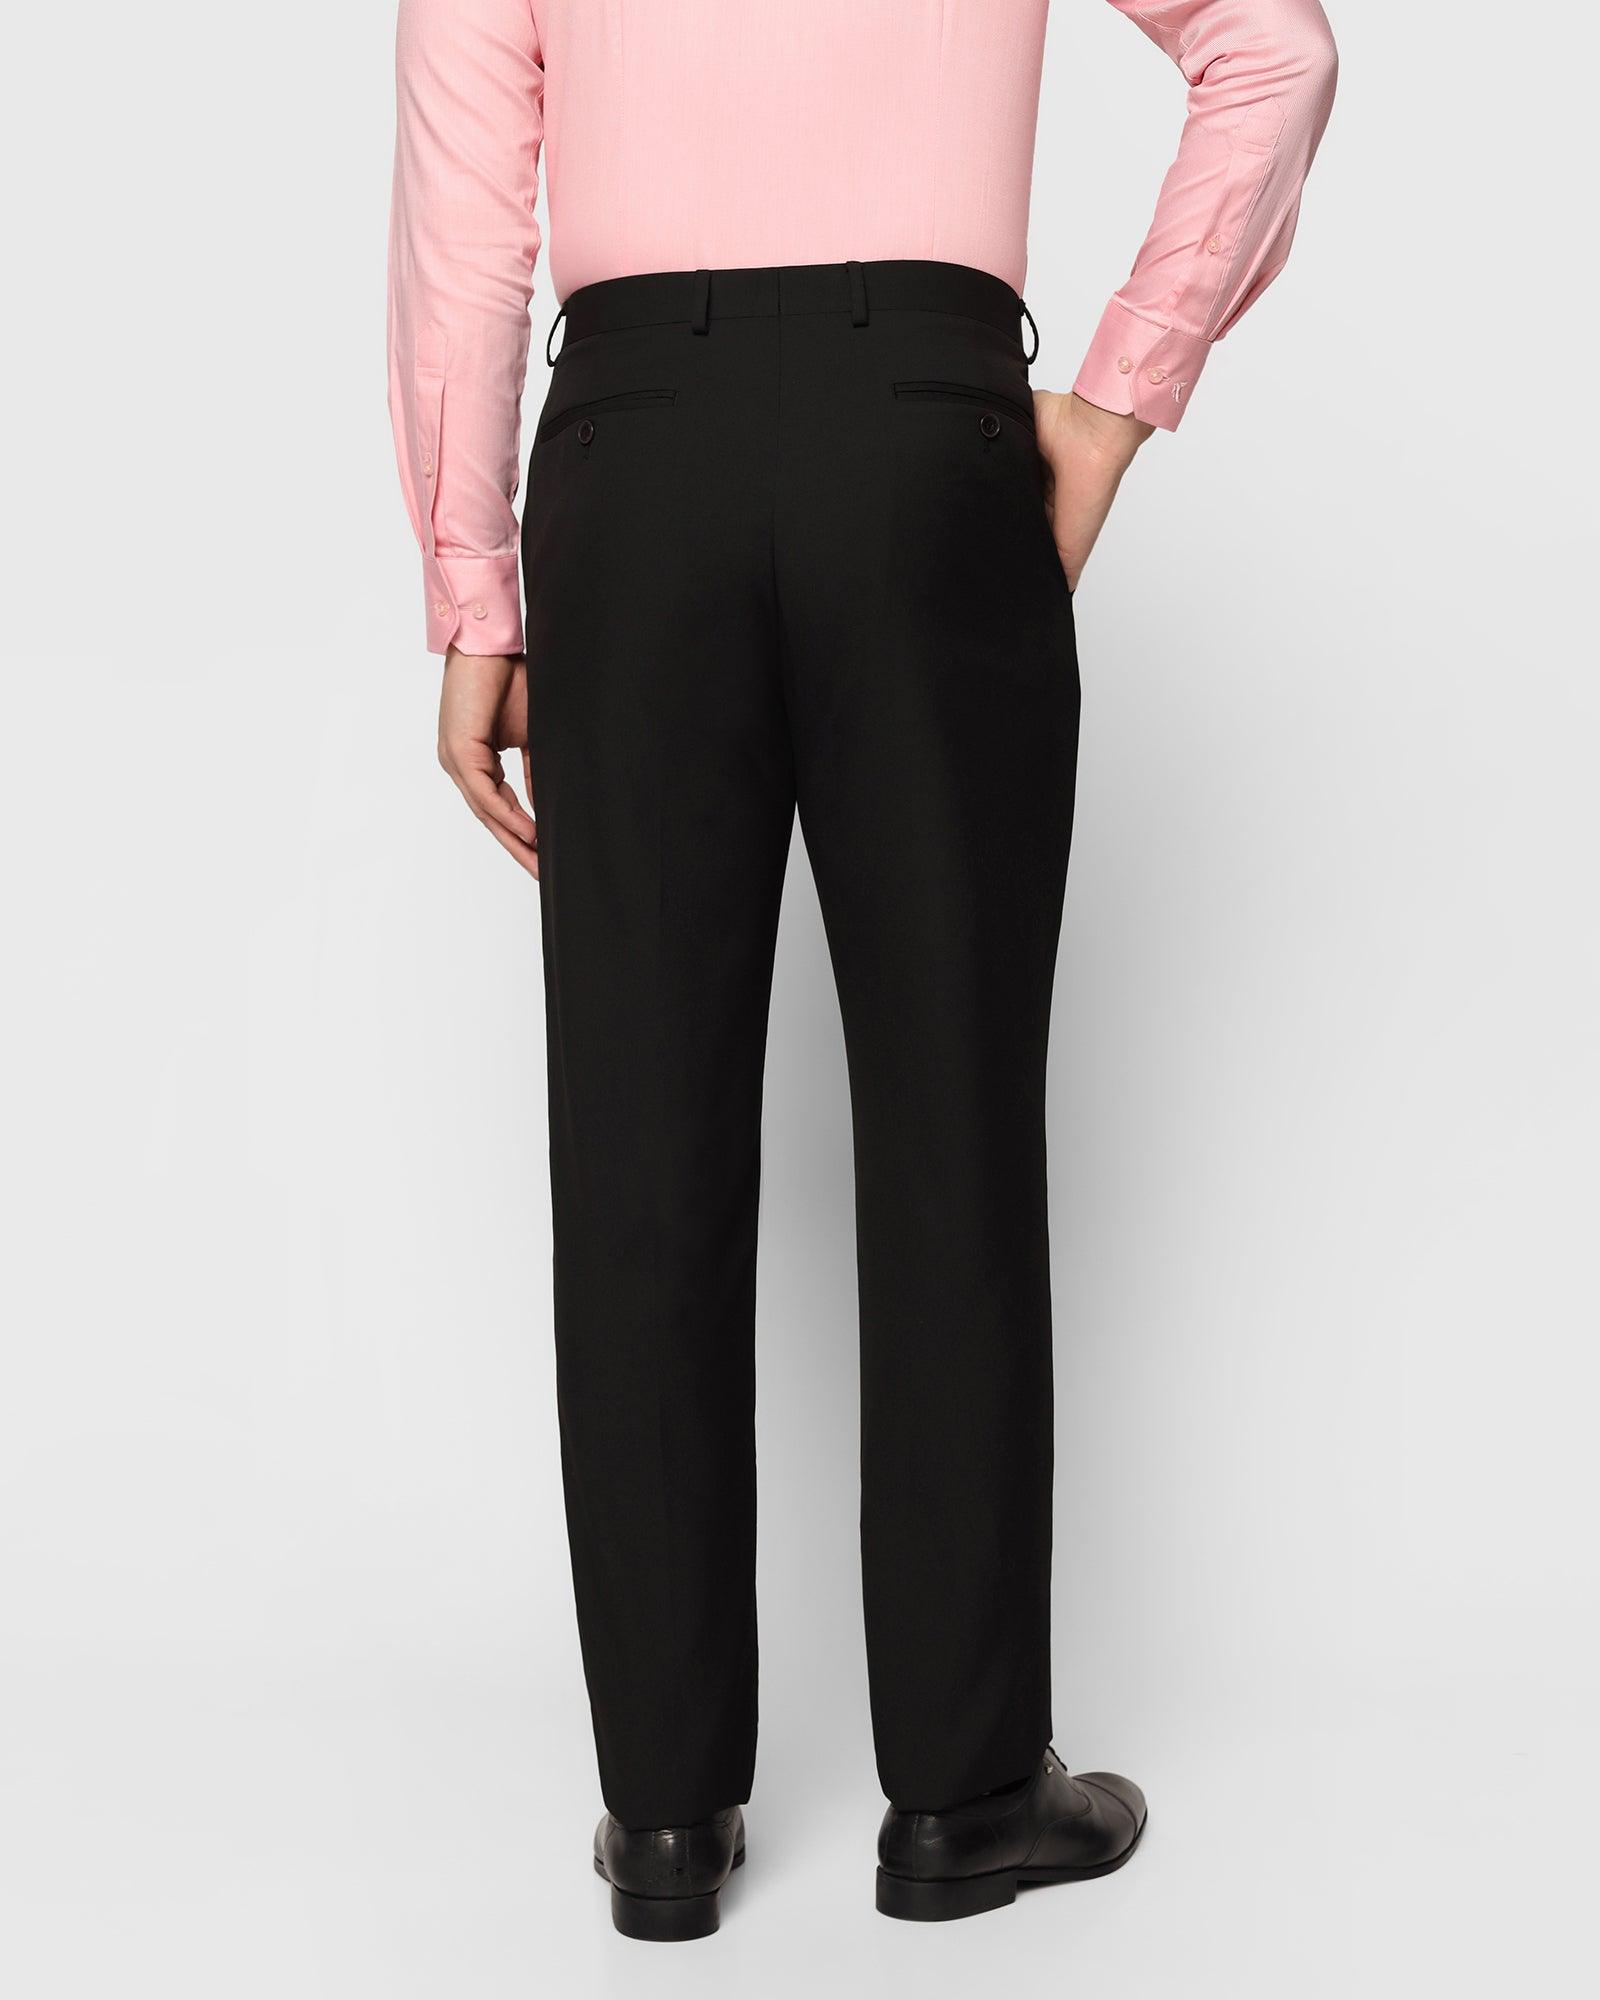 Blackberry trouser | Clothes design, Trousers, Style